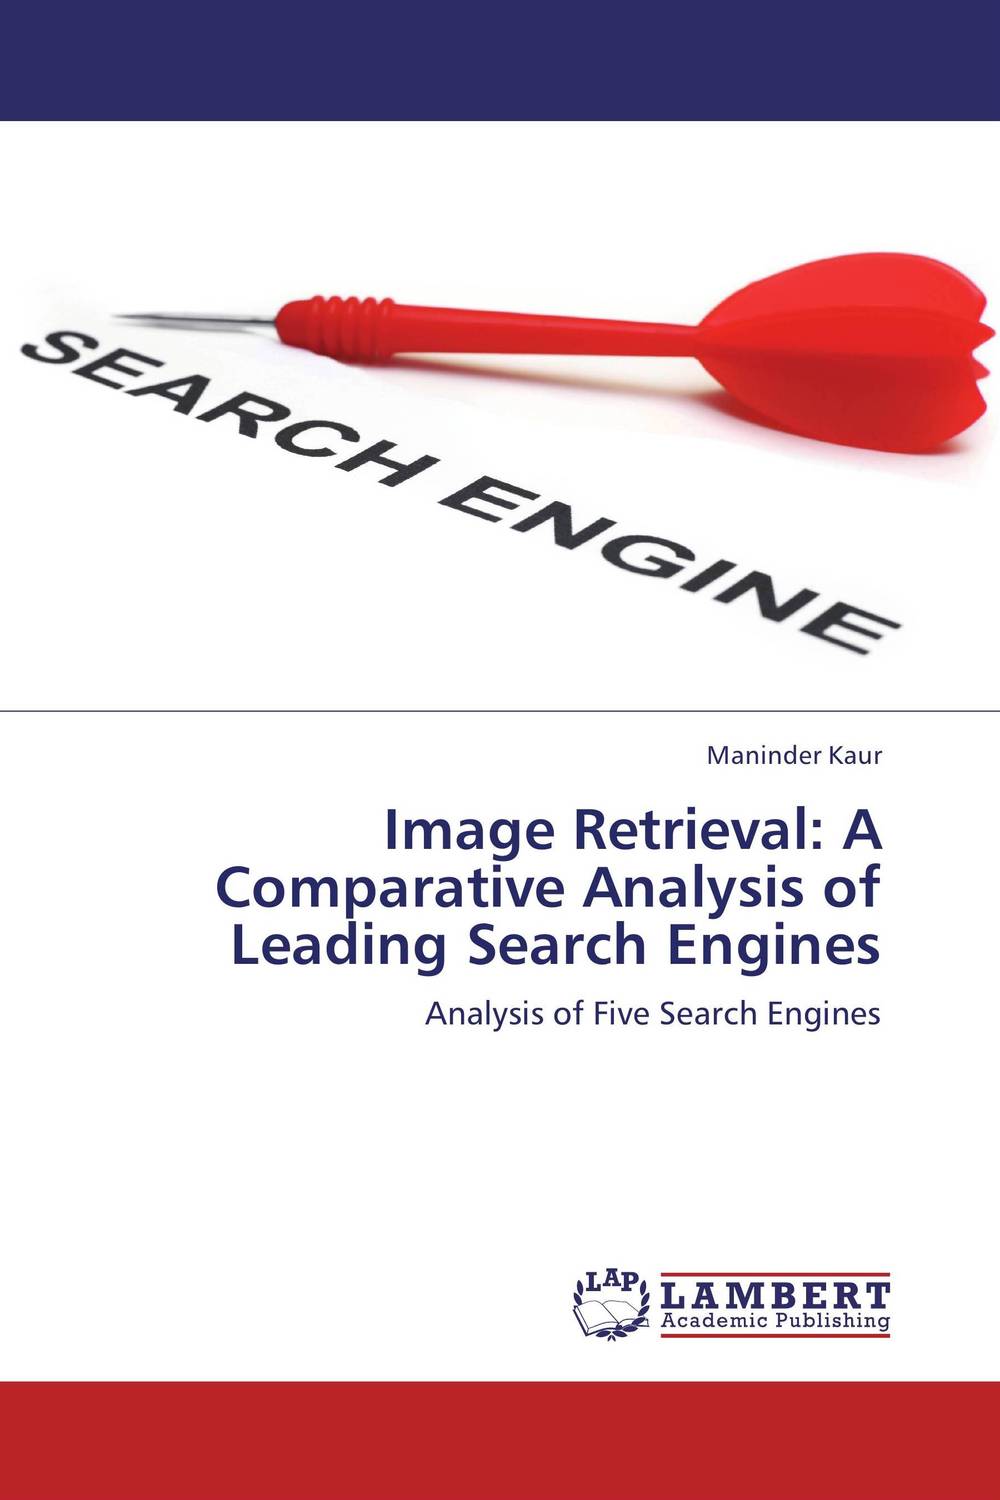 Image Retrieval: A Comparative Analysis of Leading Search Engines